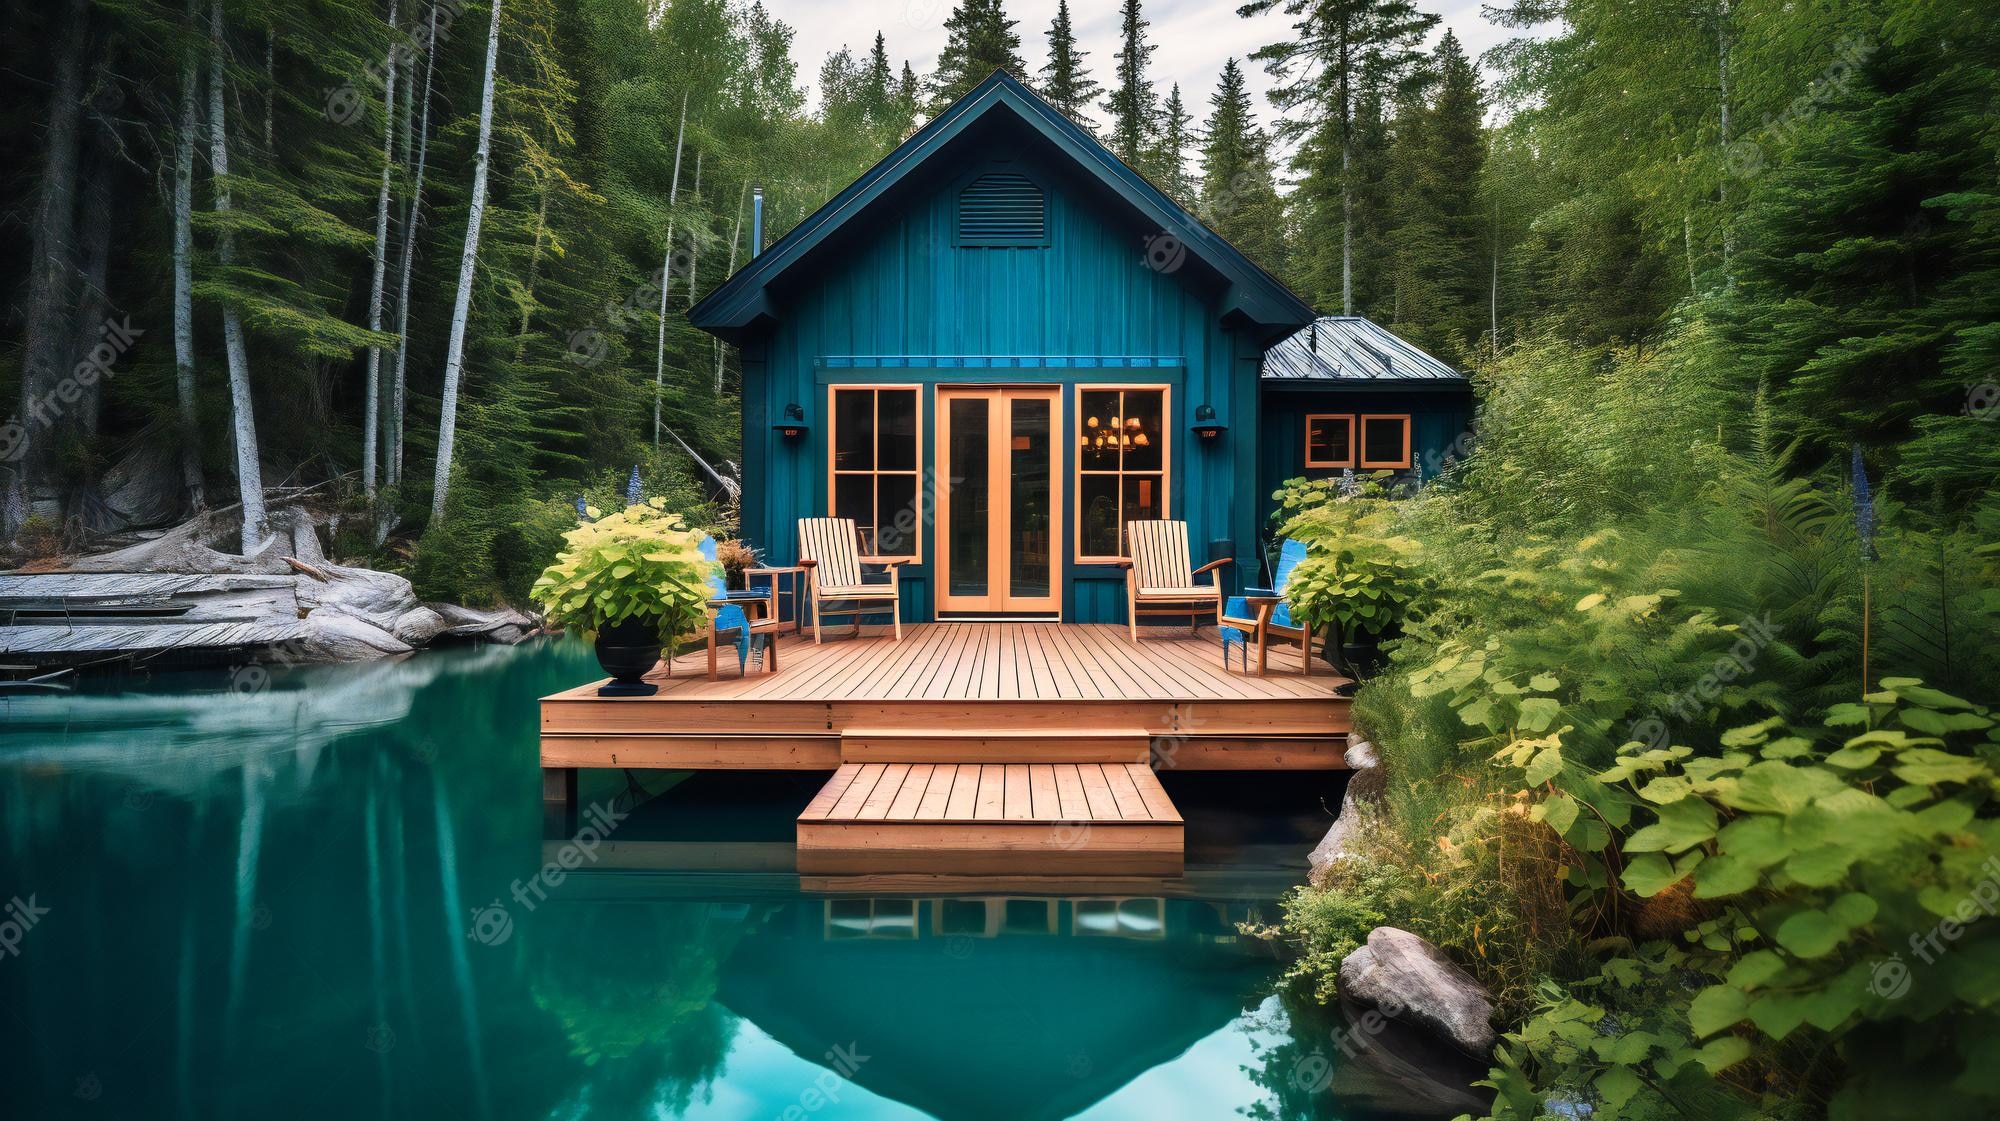 Premium Photo. A striking image of a stylish lakeside cabin with a private dock and modern amenities providing the ultimate highend summer experience